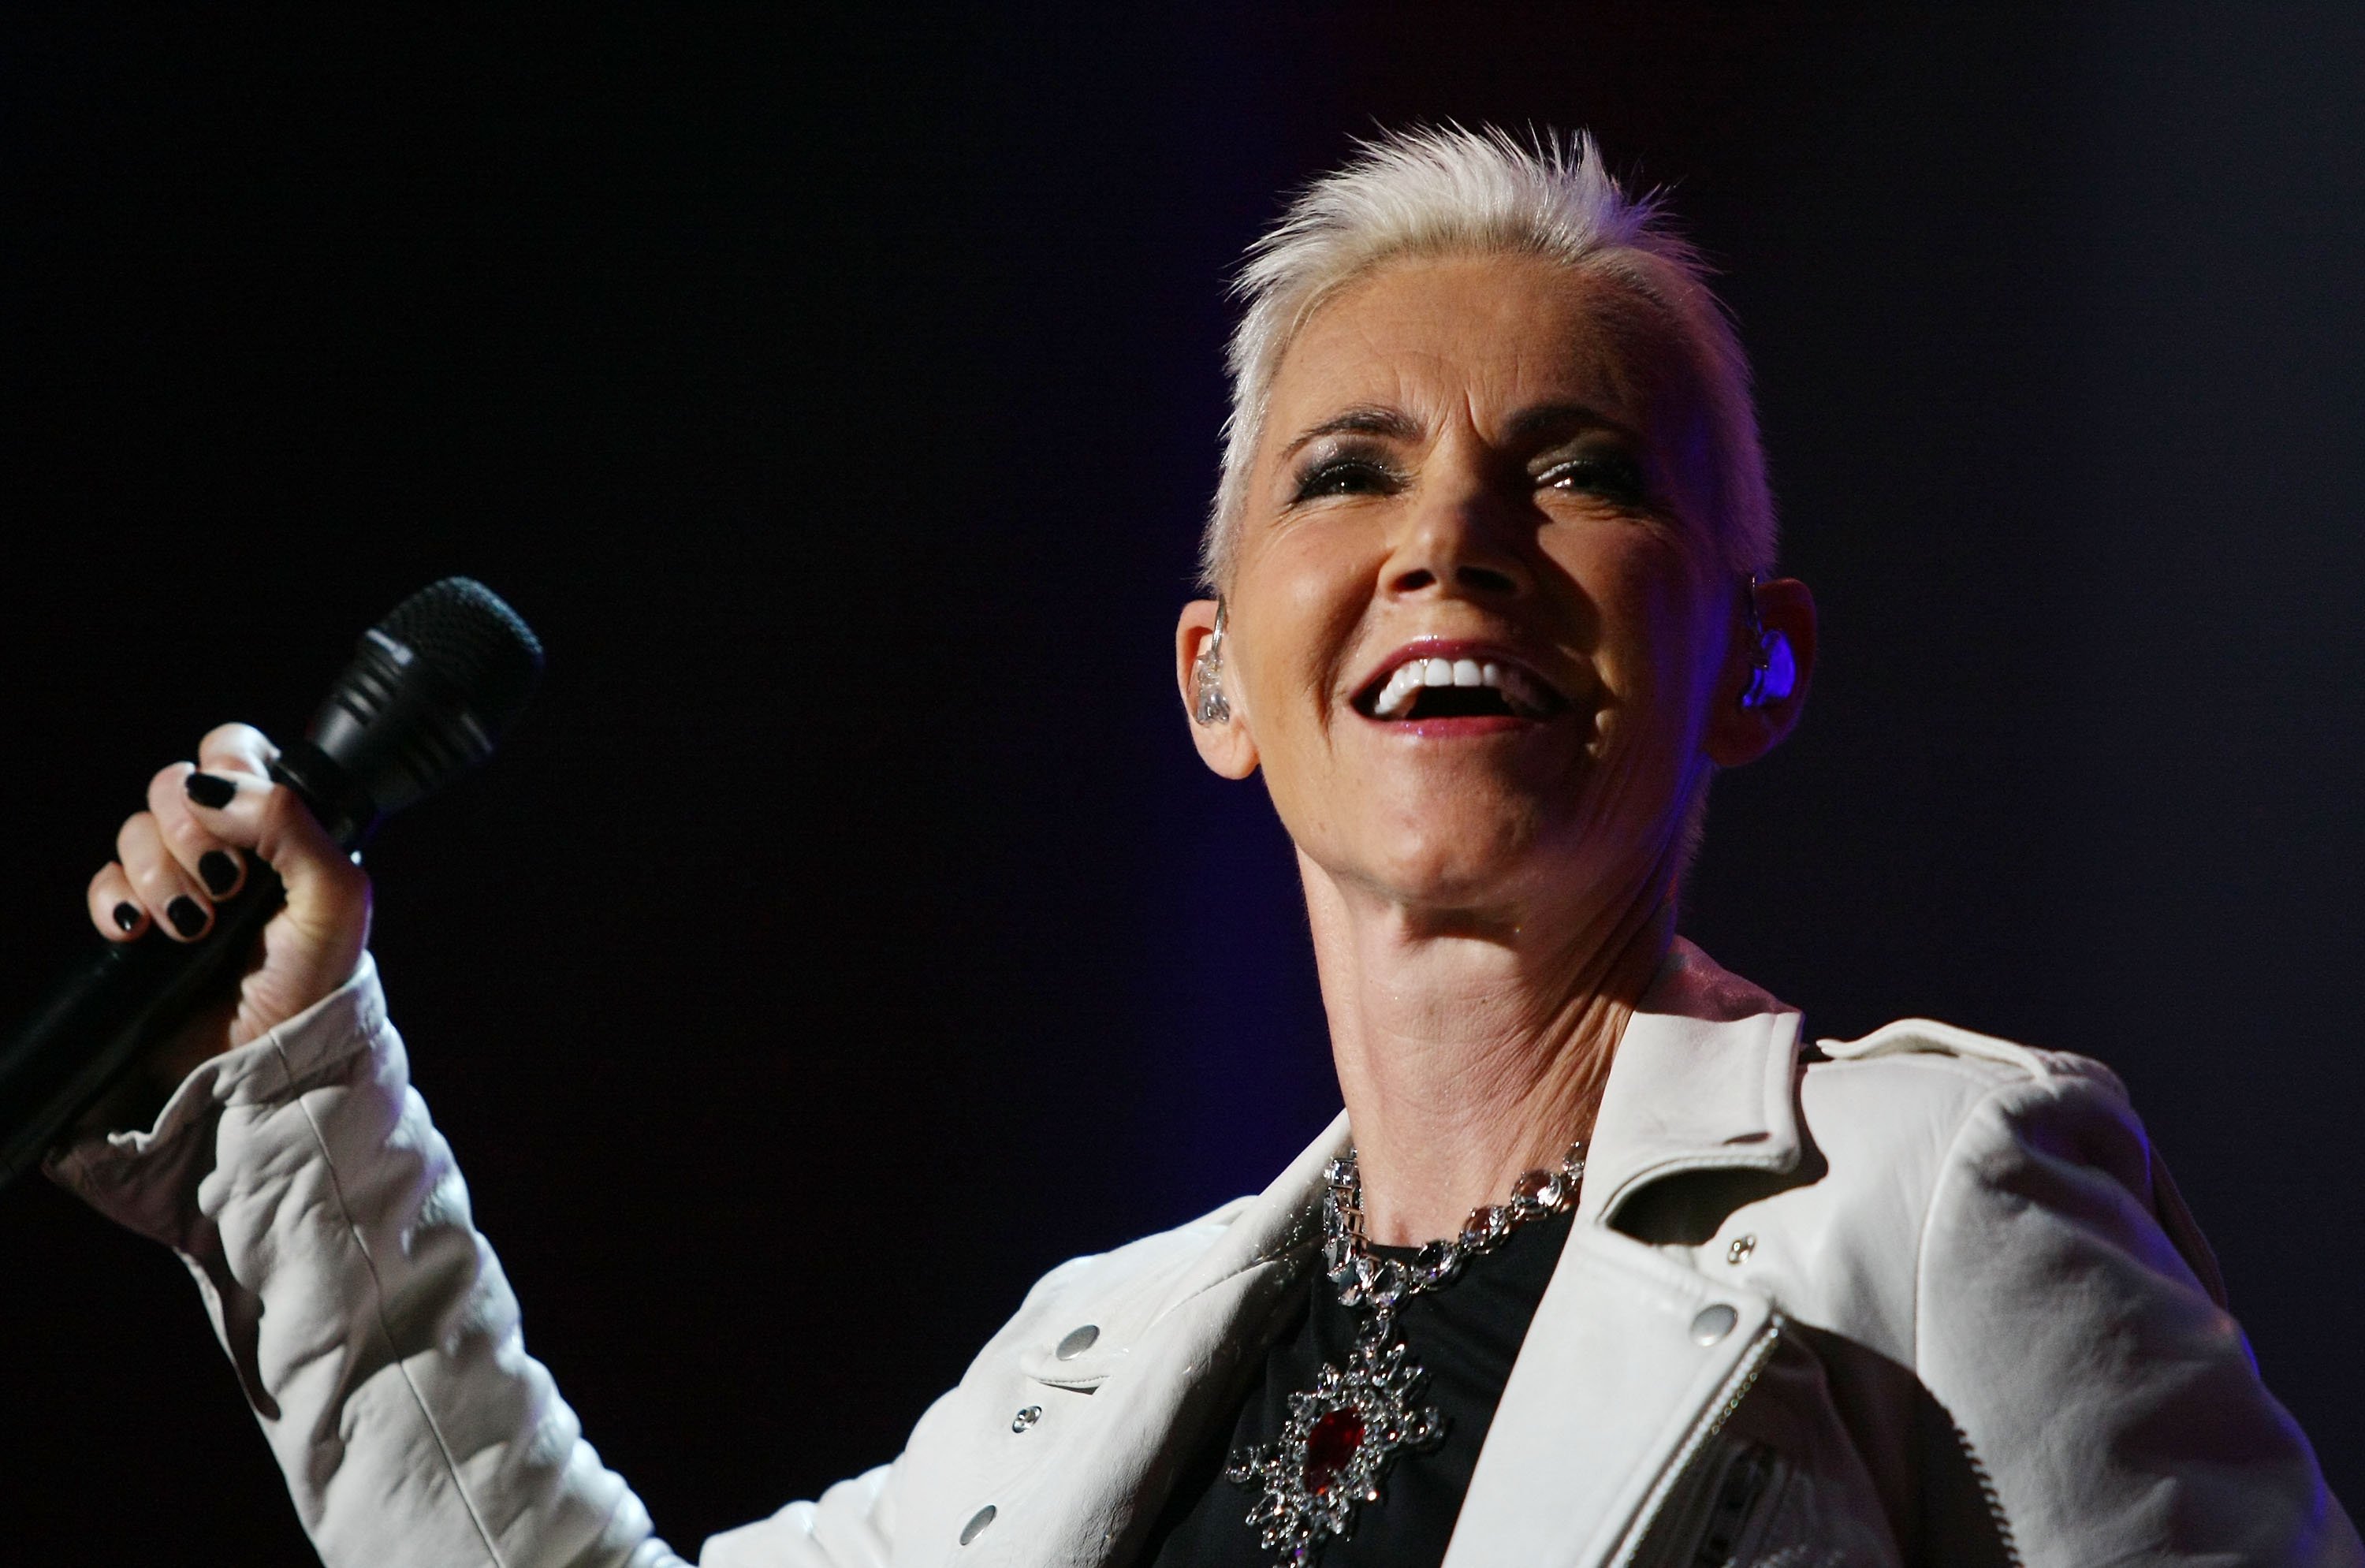 Marie Fredriksson of Roxette performs on stage during their concert at Sydney Entertainment Centre on February 16, 2012 | Photo: GettyImages